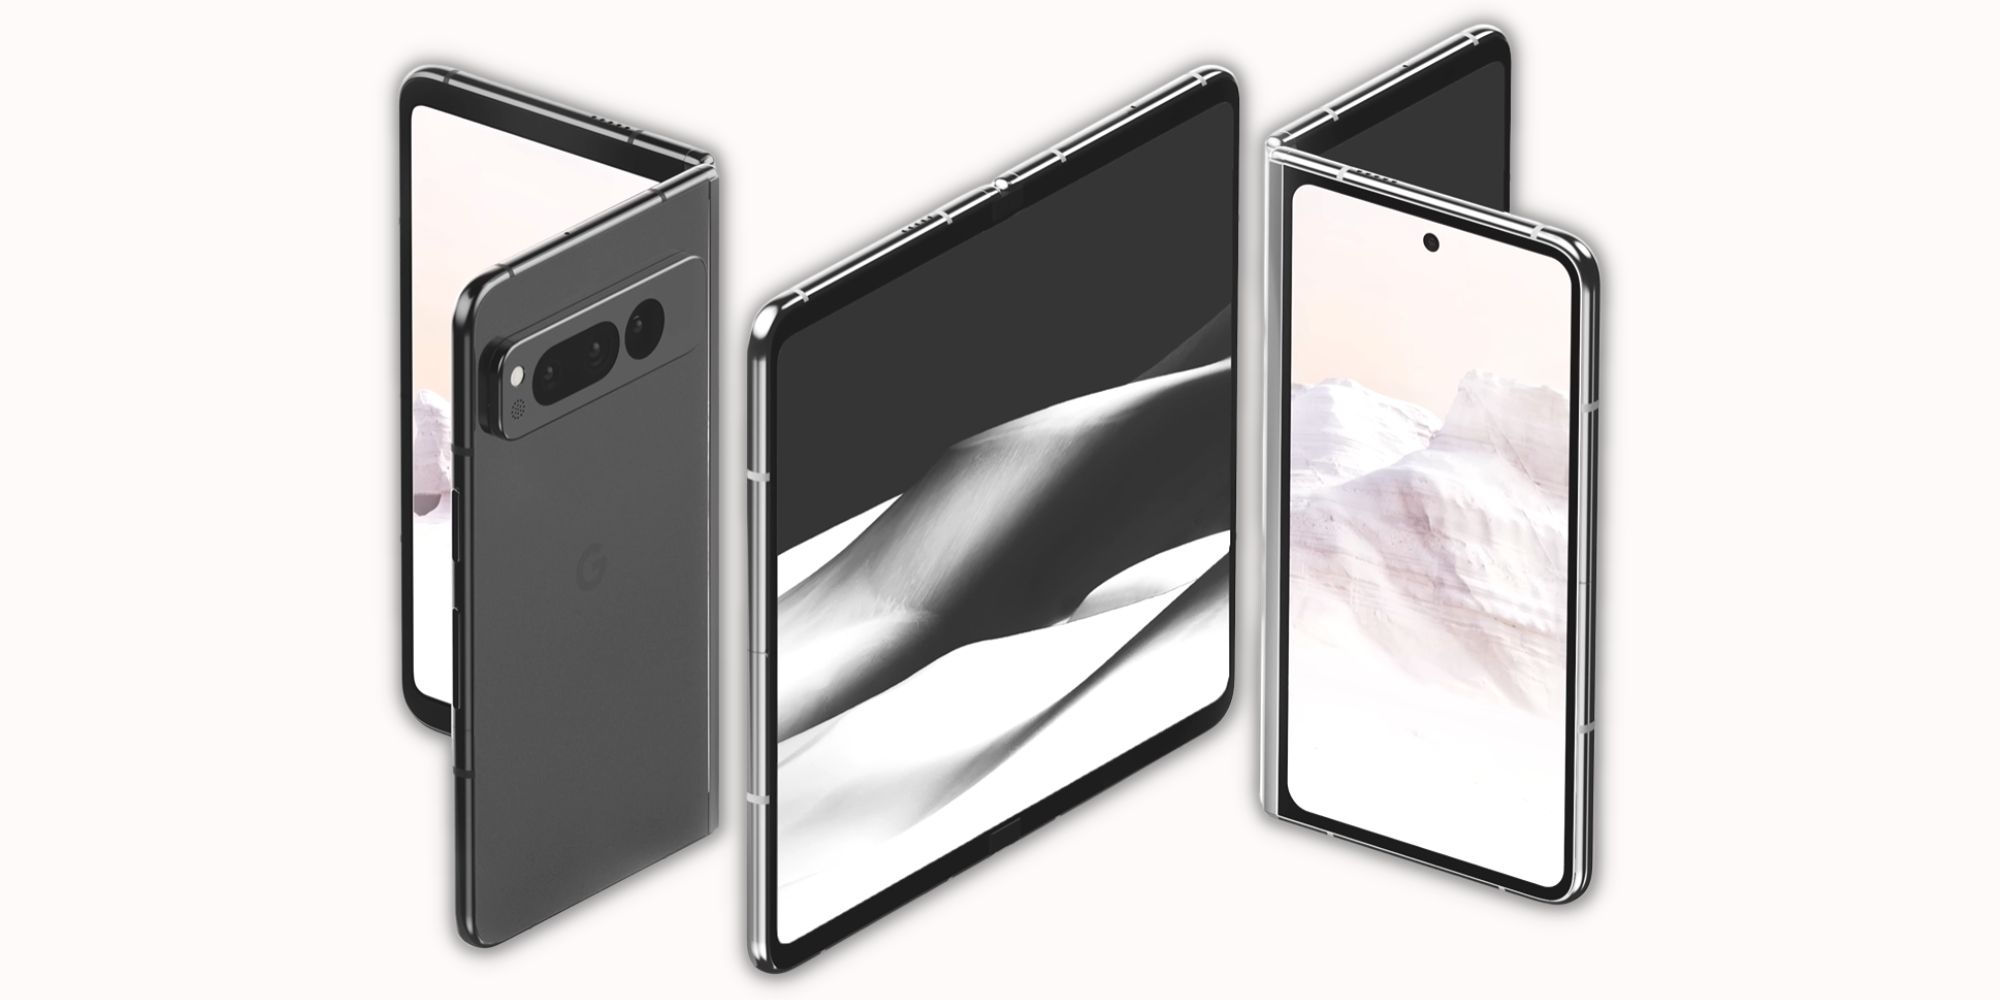 Leaked renders of the Google Pixel Fold showing the phone closed, open, and inward folded